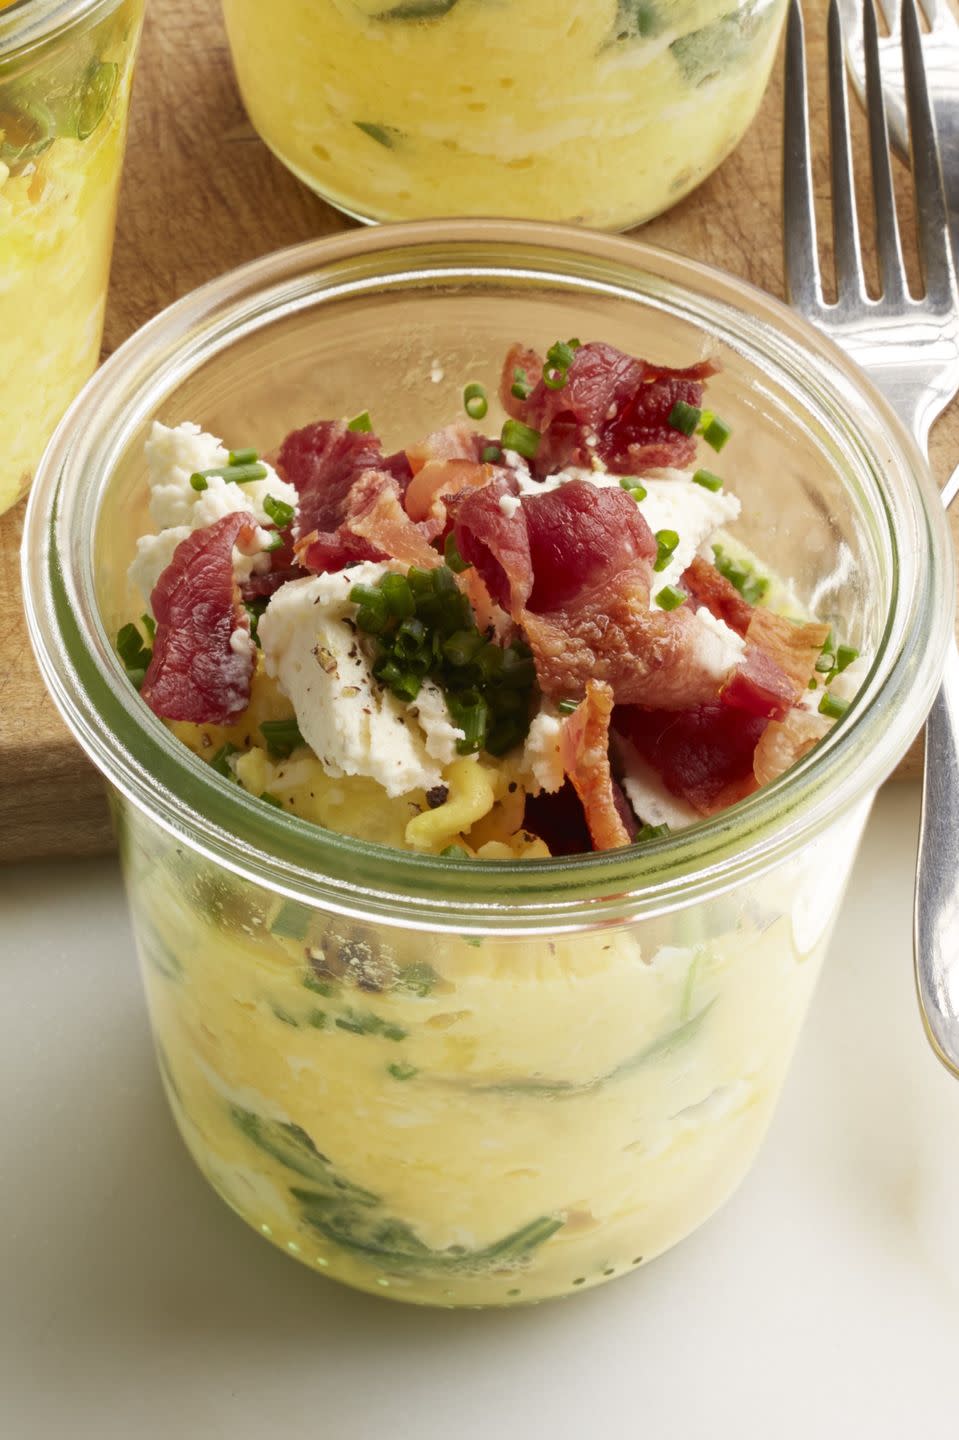 Boursin, Bacon, and Spinach Scrambled Eggs in a Jar